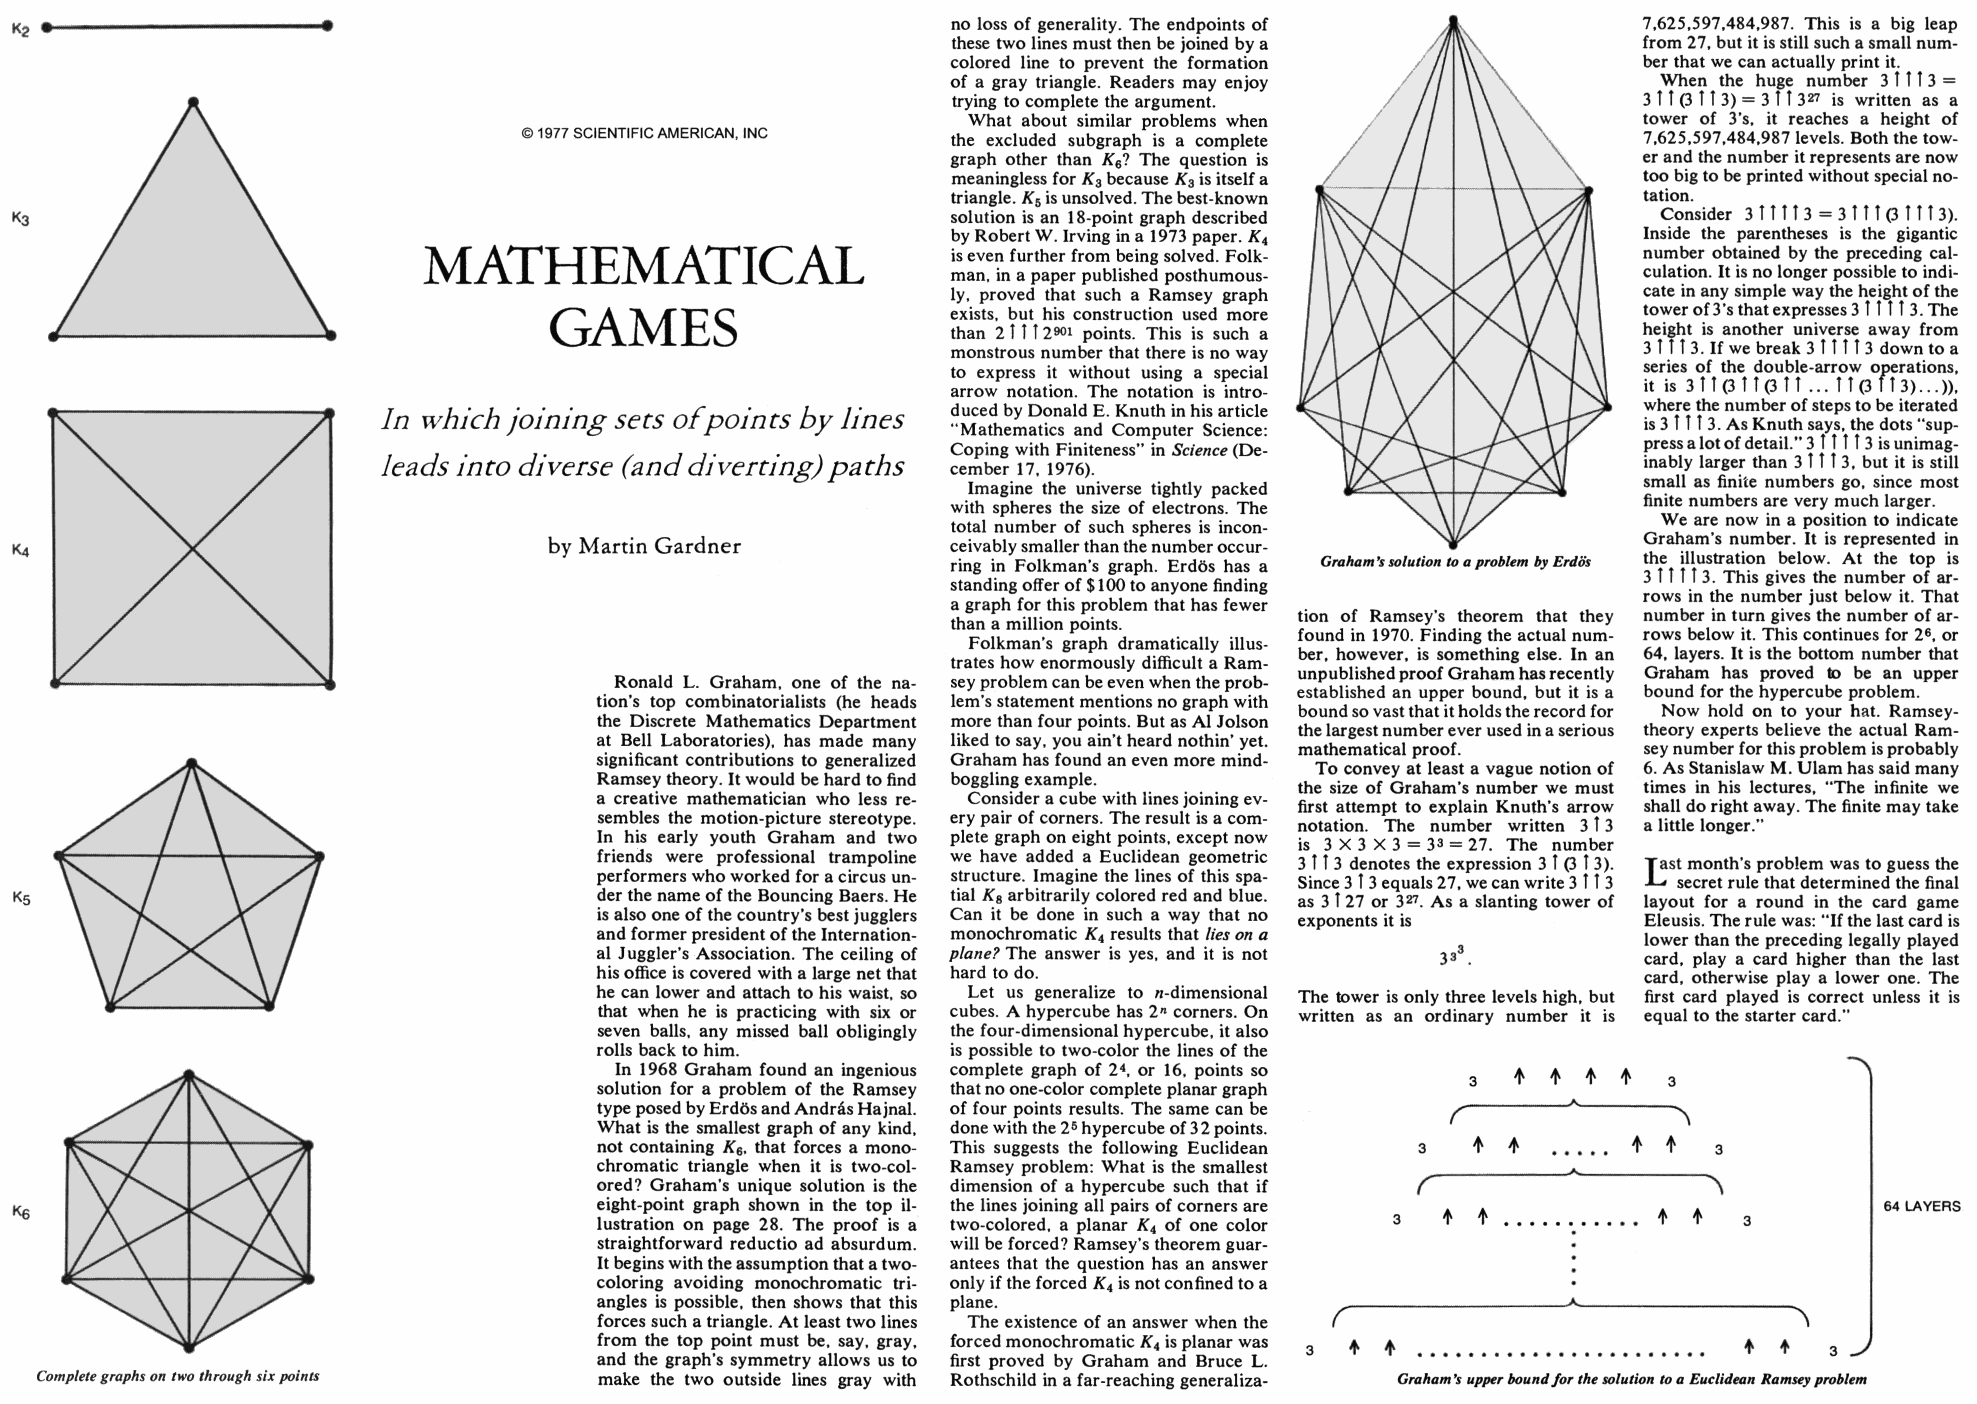 Pages from Martin Gardner's article on Graham's number